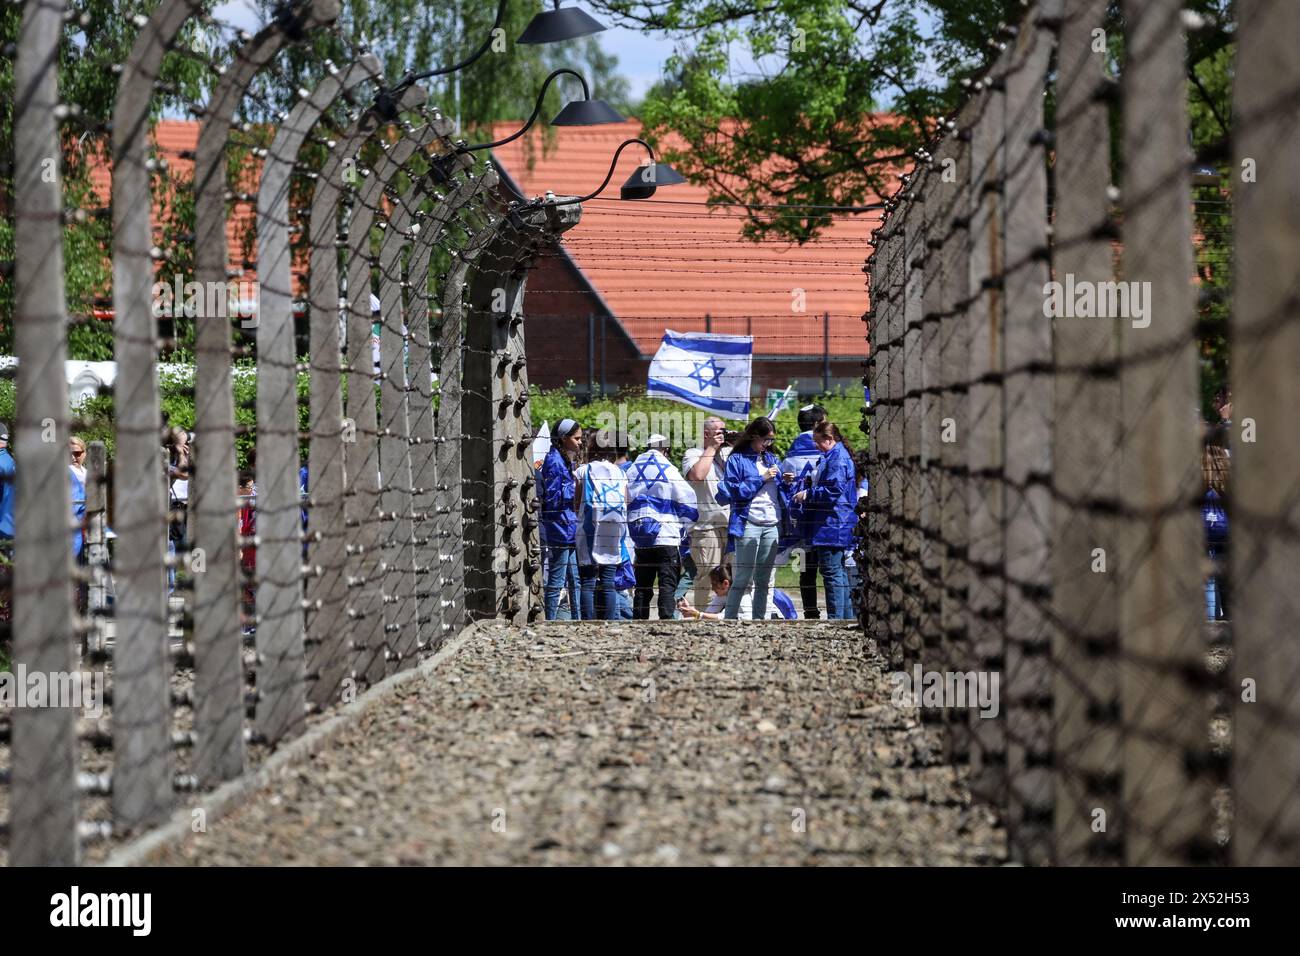 Oswiecim, Poland, May 6, 2024. Visitors walks past wired fence as they arrive for the March of the Living 2024 at Auschwitz Camp gate 'Work Makes you Free'Yoav Kisch, Minister of Education of Israel (C) visits exhibitions as he arrive for the March of the Living at Auschwitz Camp gate 'Work Makes you Free', with 55 Holocaust survivors participating. Holocaust survivors, and October 7th survivors attend the March of the Living together with a delegation from, among others, the United States, Canada, Italy, United Kingdom. On Holocaust Memorial Day observed in the Jewish calendar (Yom HaShoah), Stock Photo